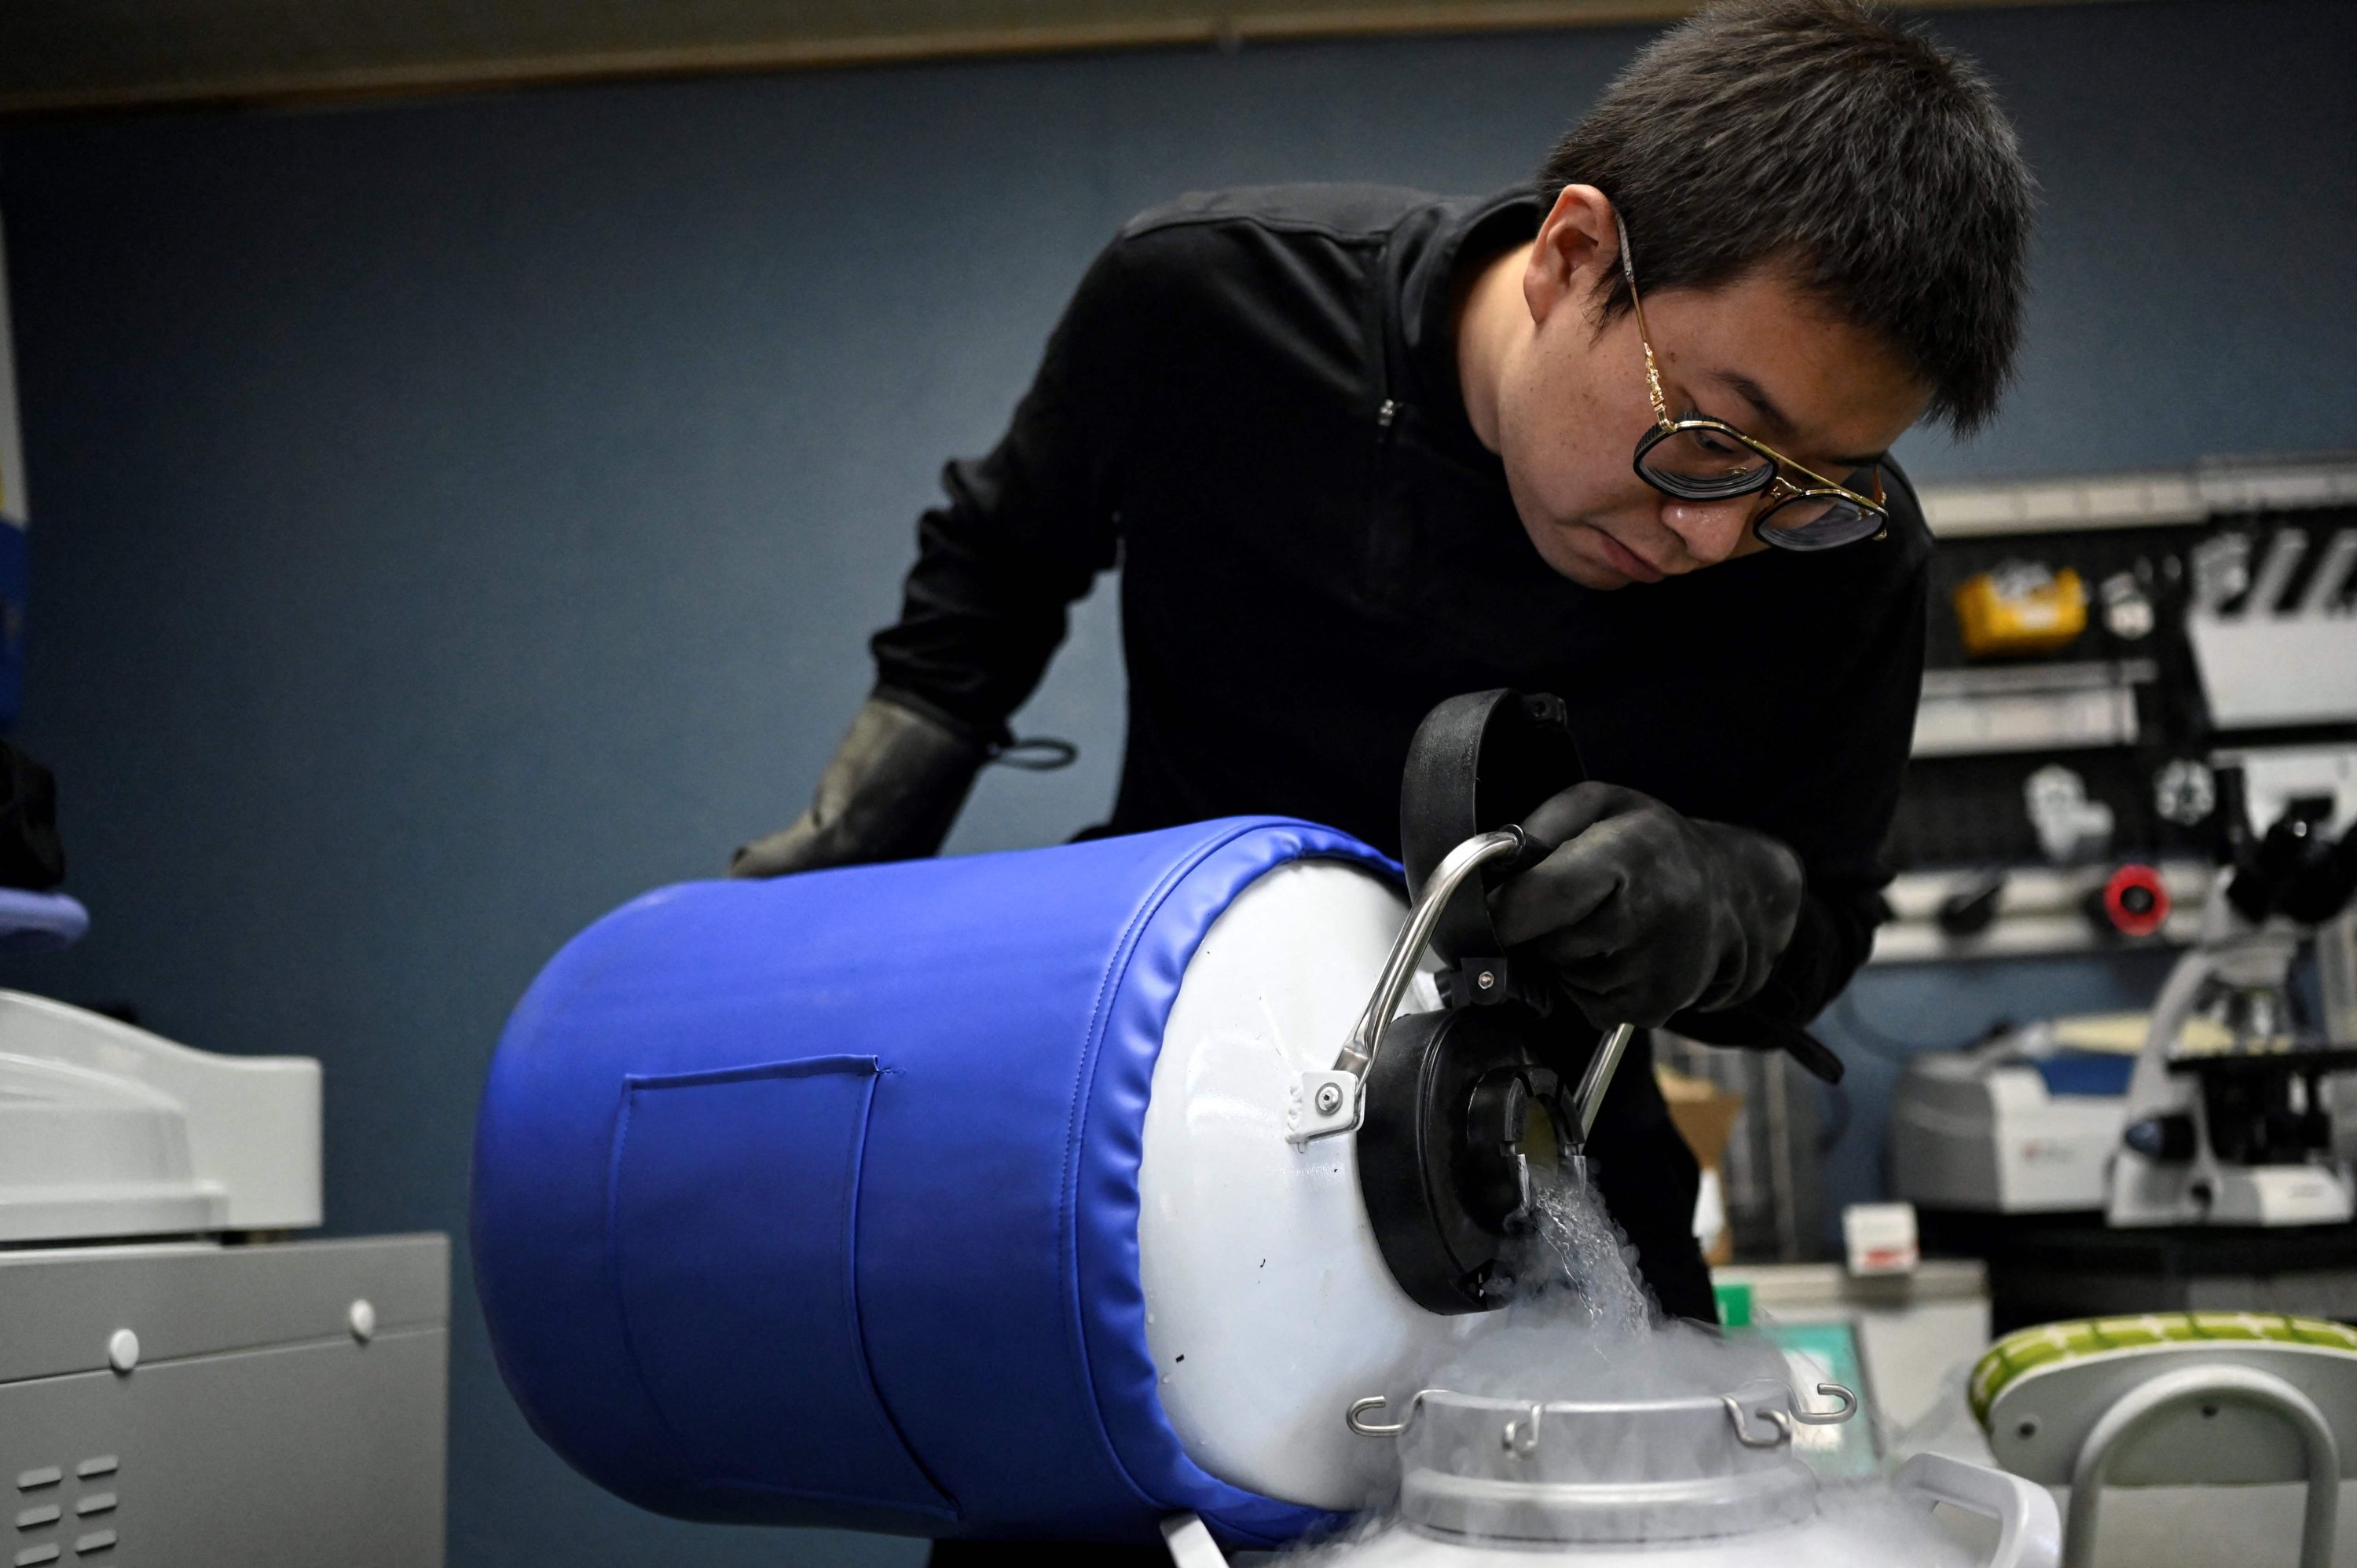 Xu Wei pouring liquid nitrogen at his home laboratory in Kunming in southwestern China's Yunnan province, Oct. 20, 2021. (AFP Photo)